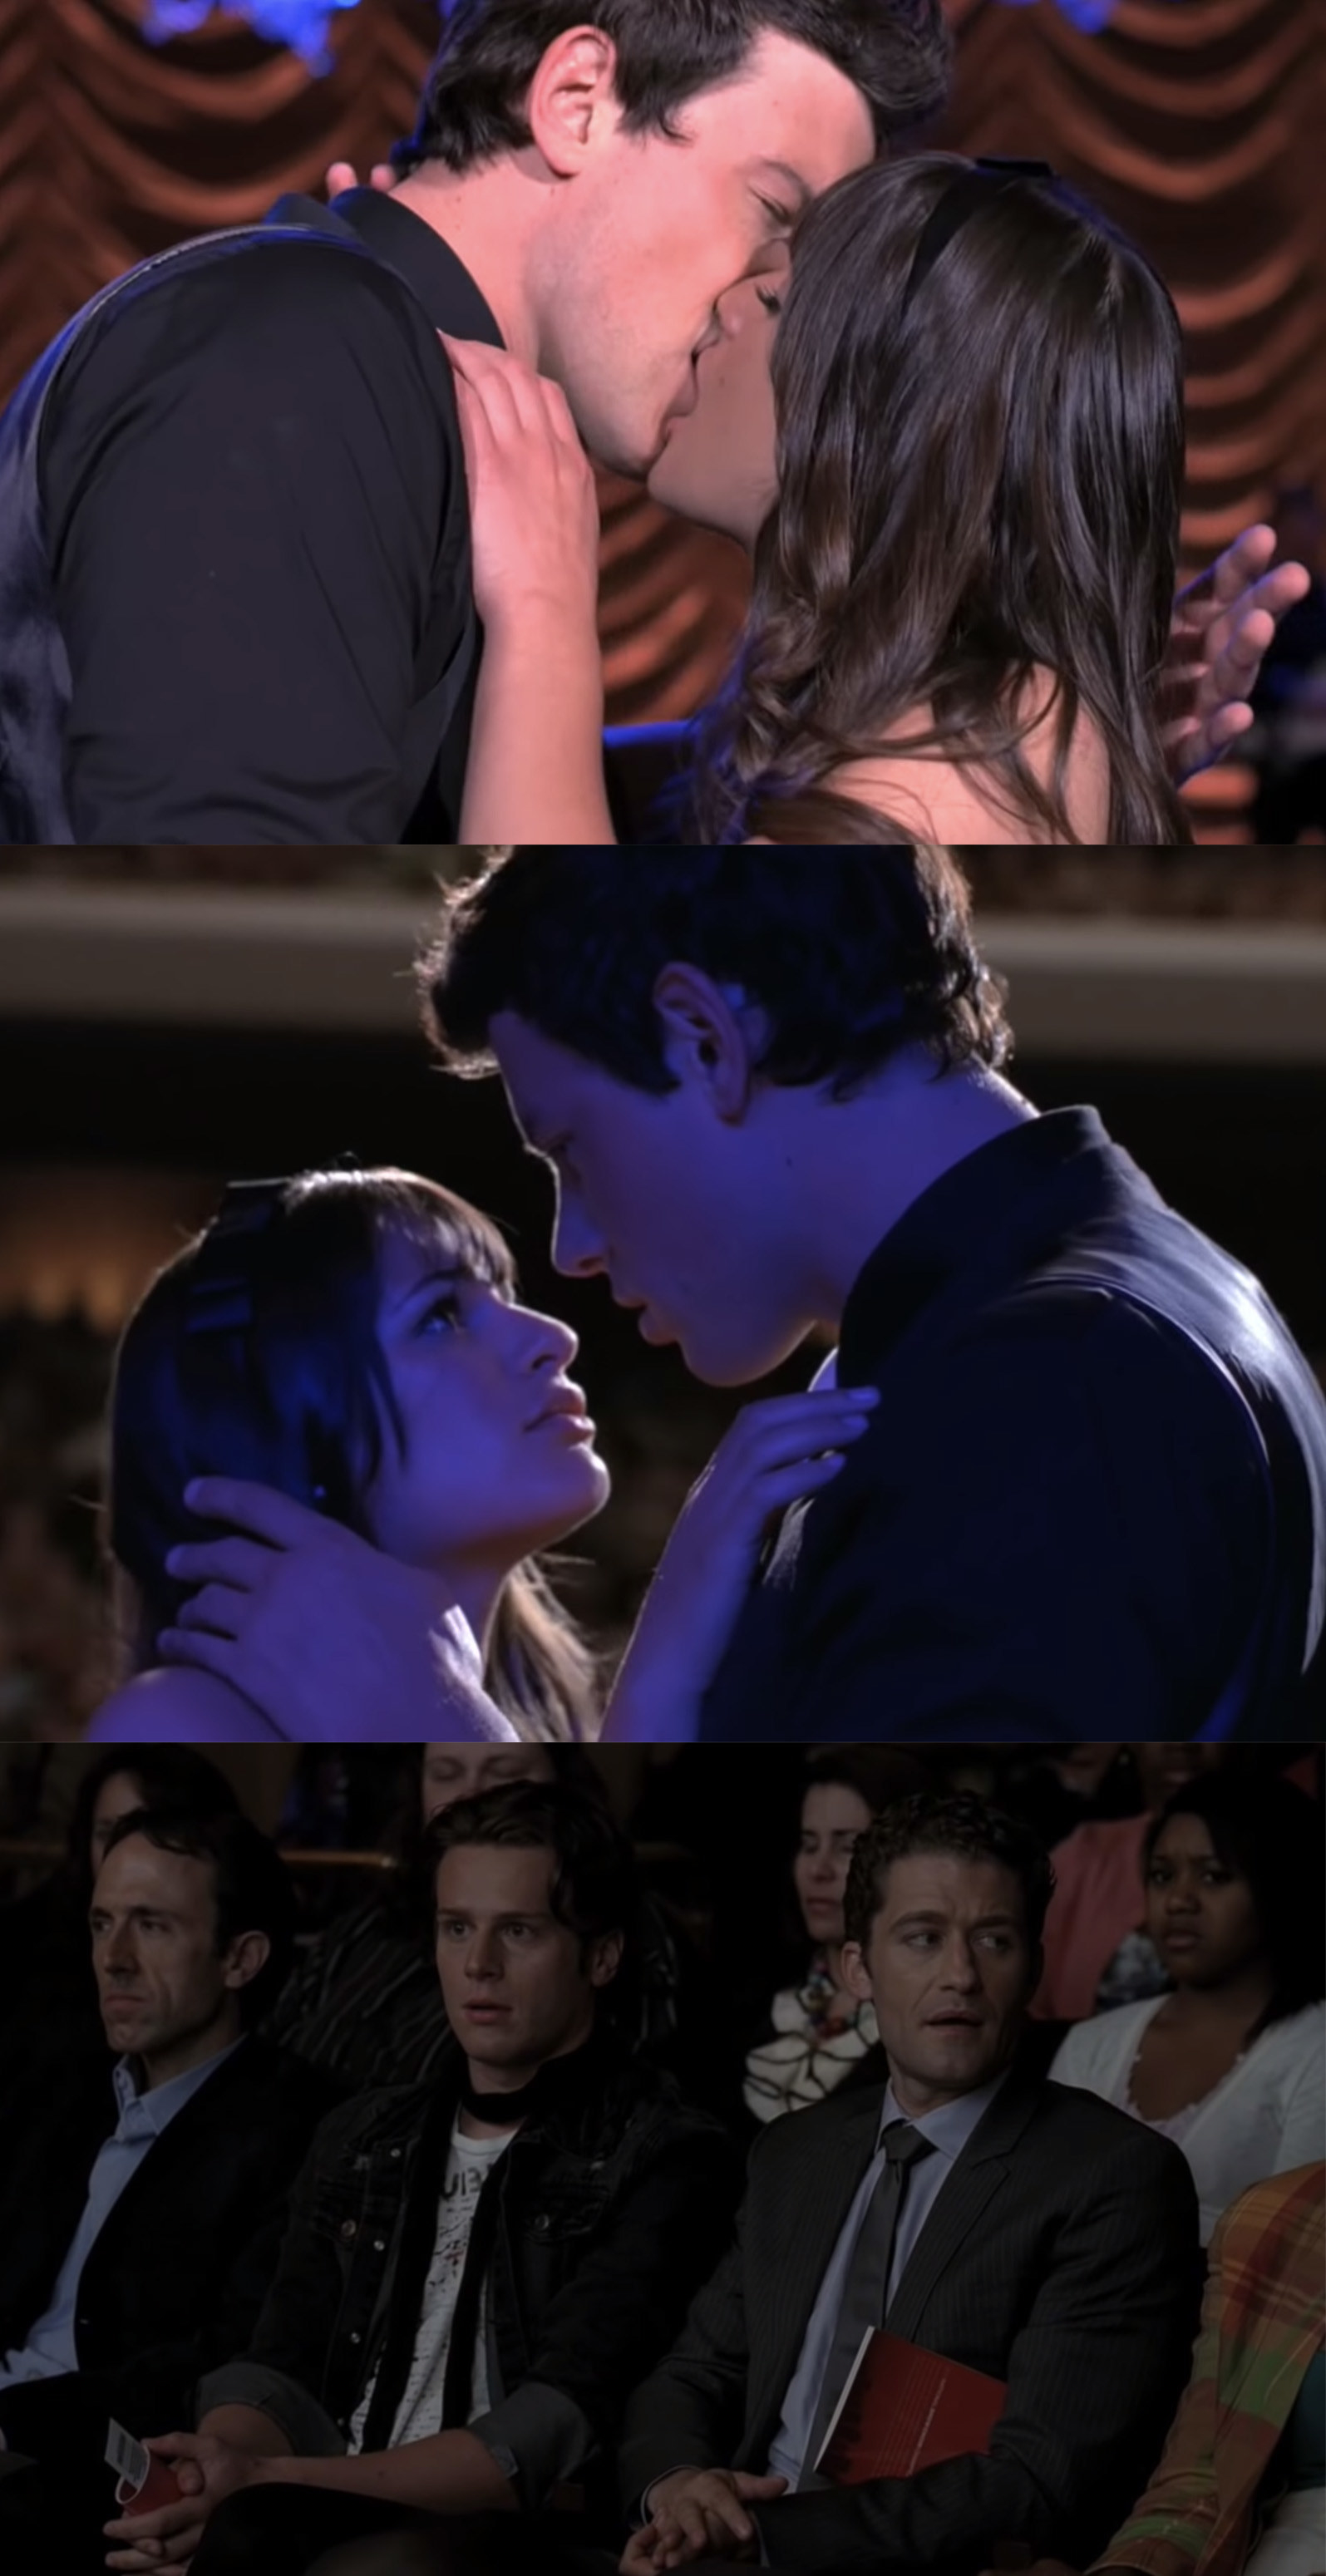 Finn and Rachel making out on stage while the audience uncomfortably stares at them. 